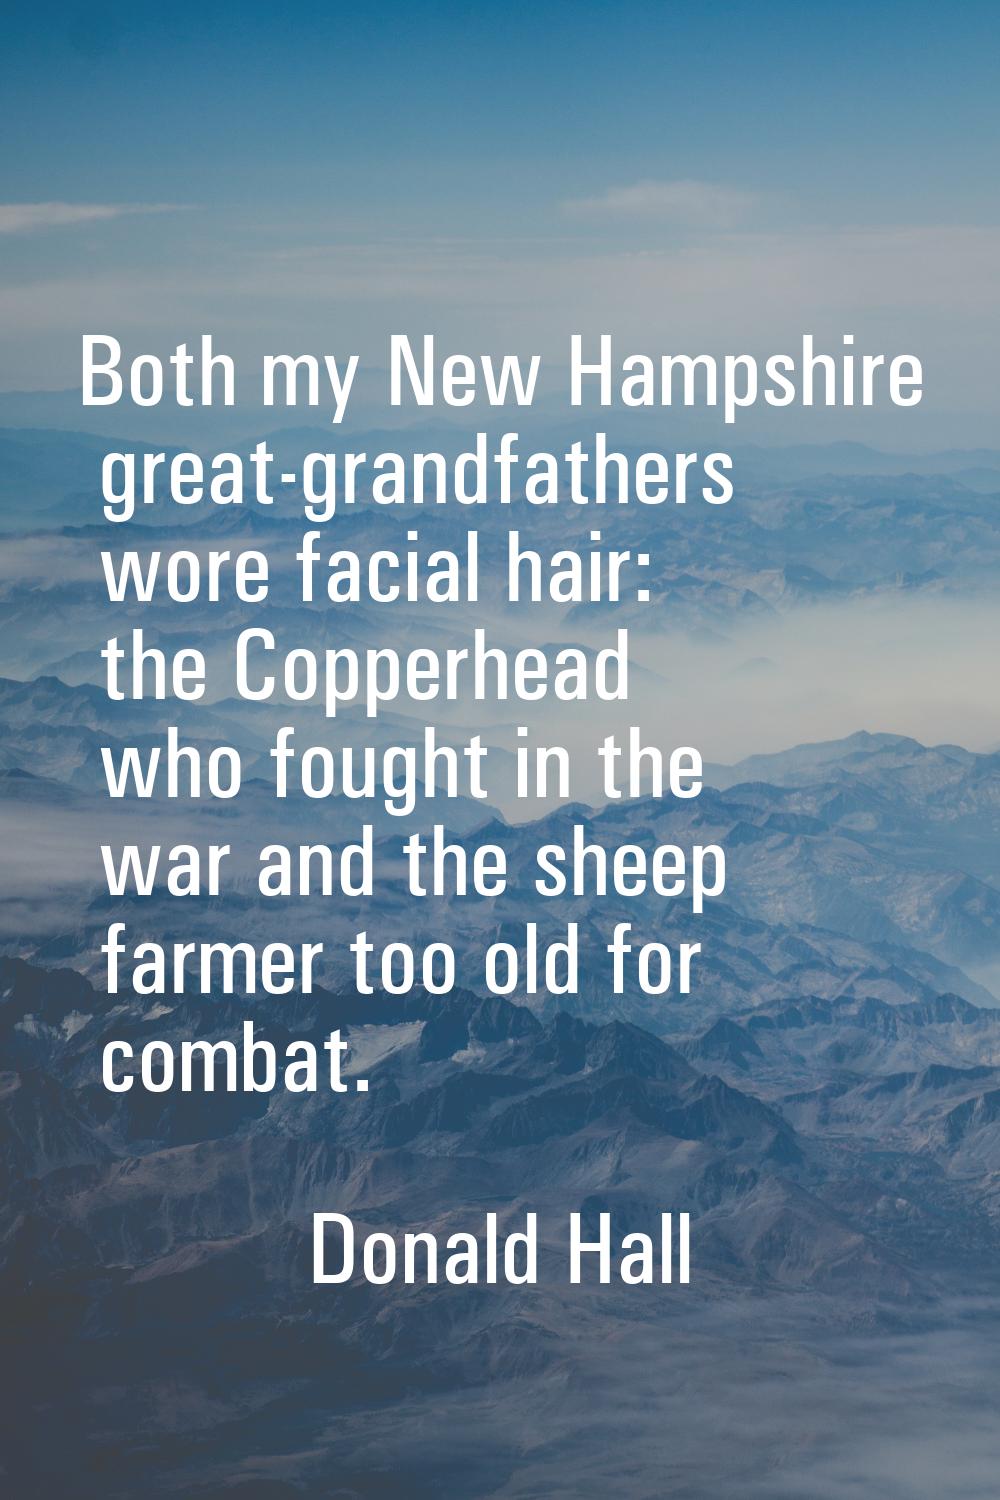 Both my New Hampshire great-grandfathers wore facial hair: the Copperhead who fought in the war and